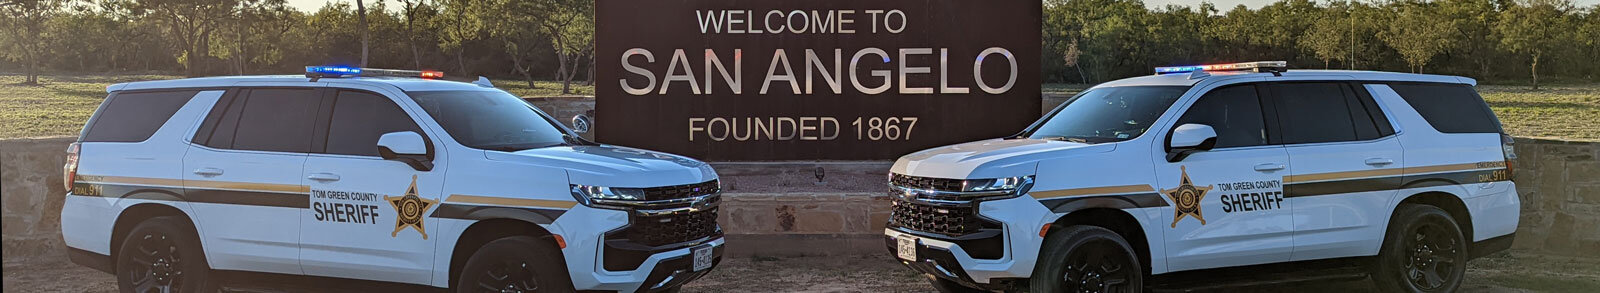 Welcome to San Angelo sign with 2 Tom Green Sheriff Vehicles parked in front